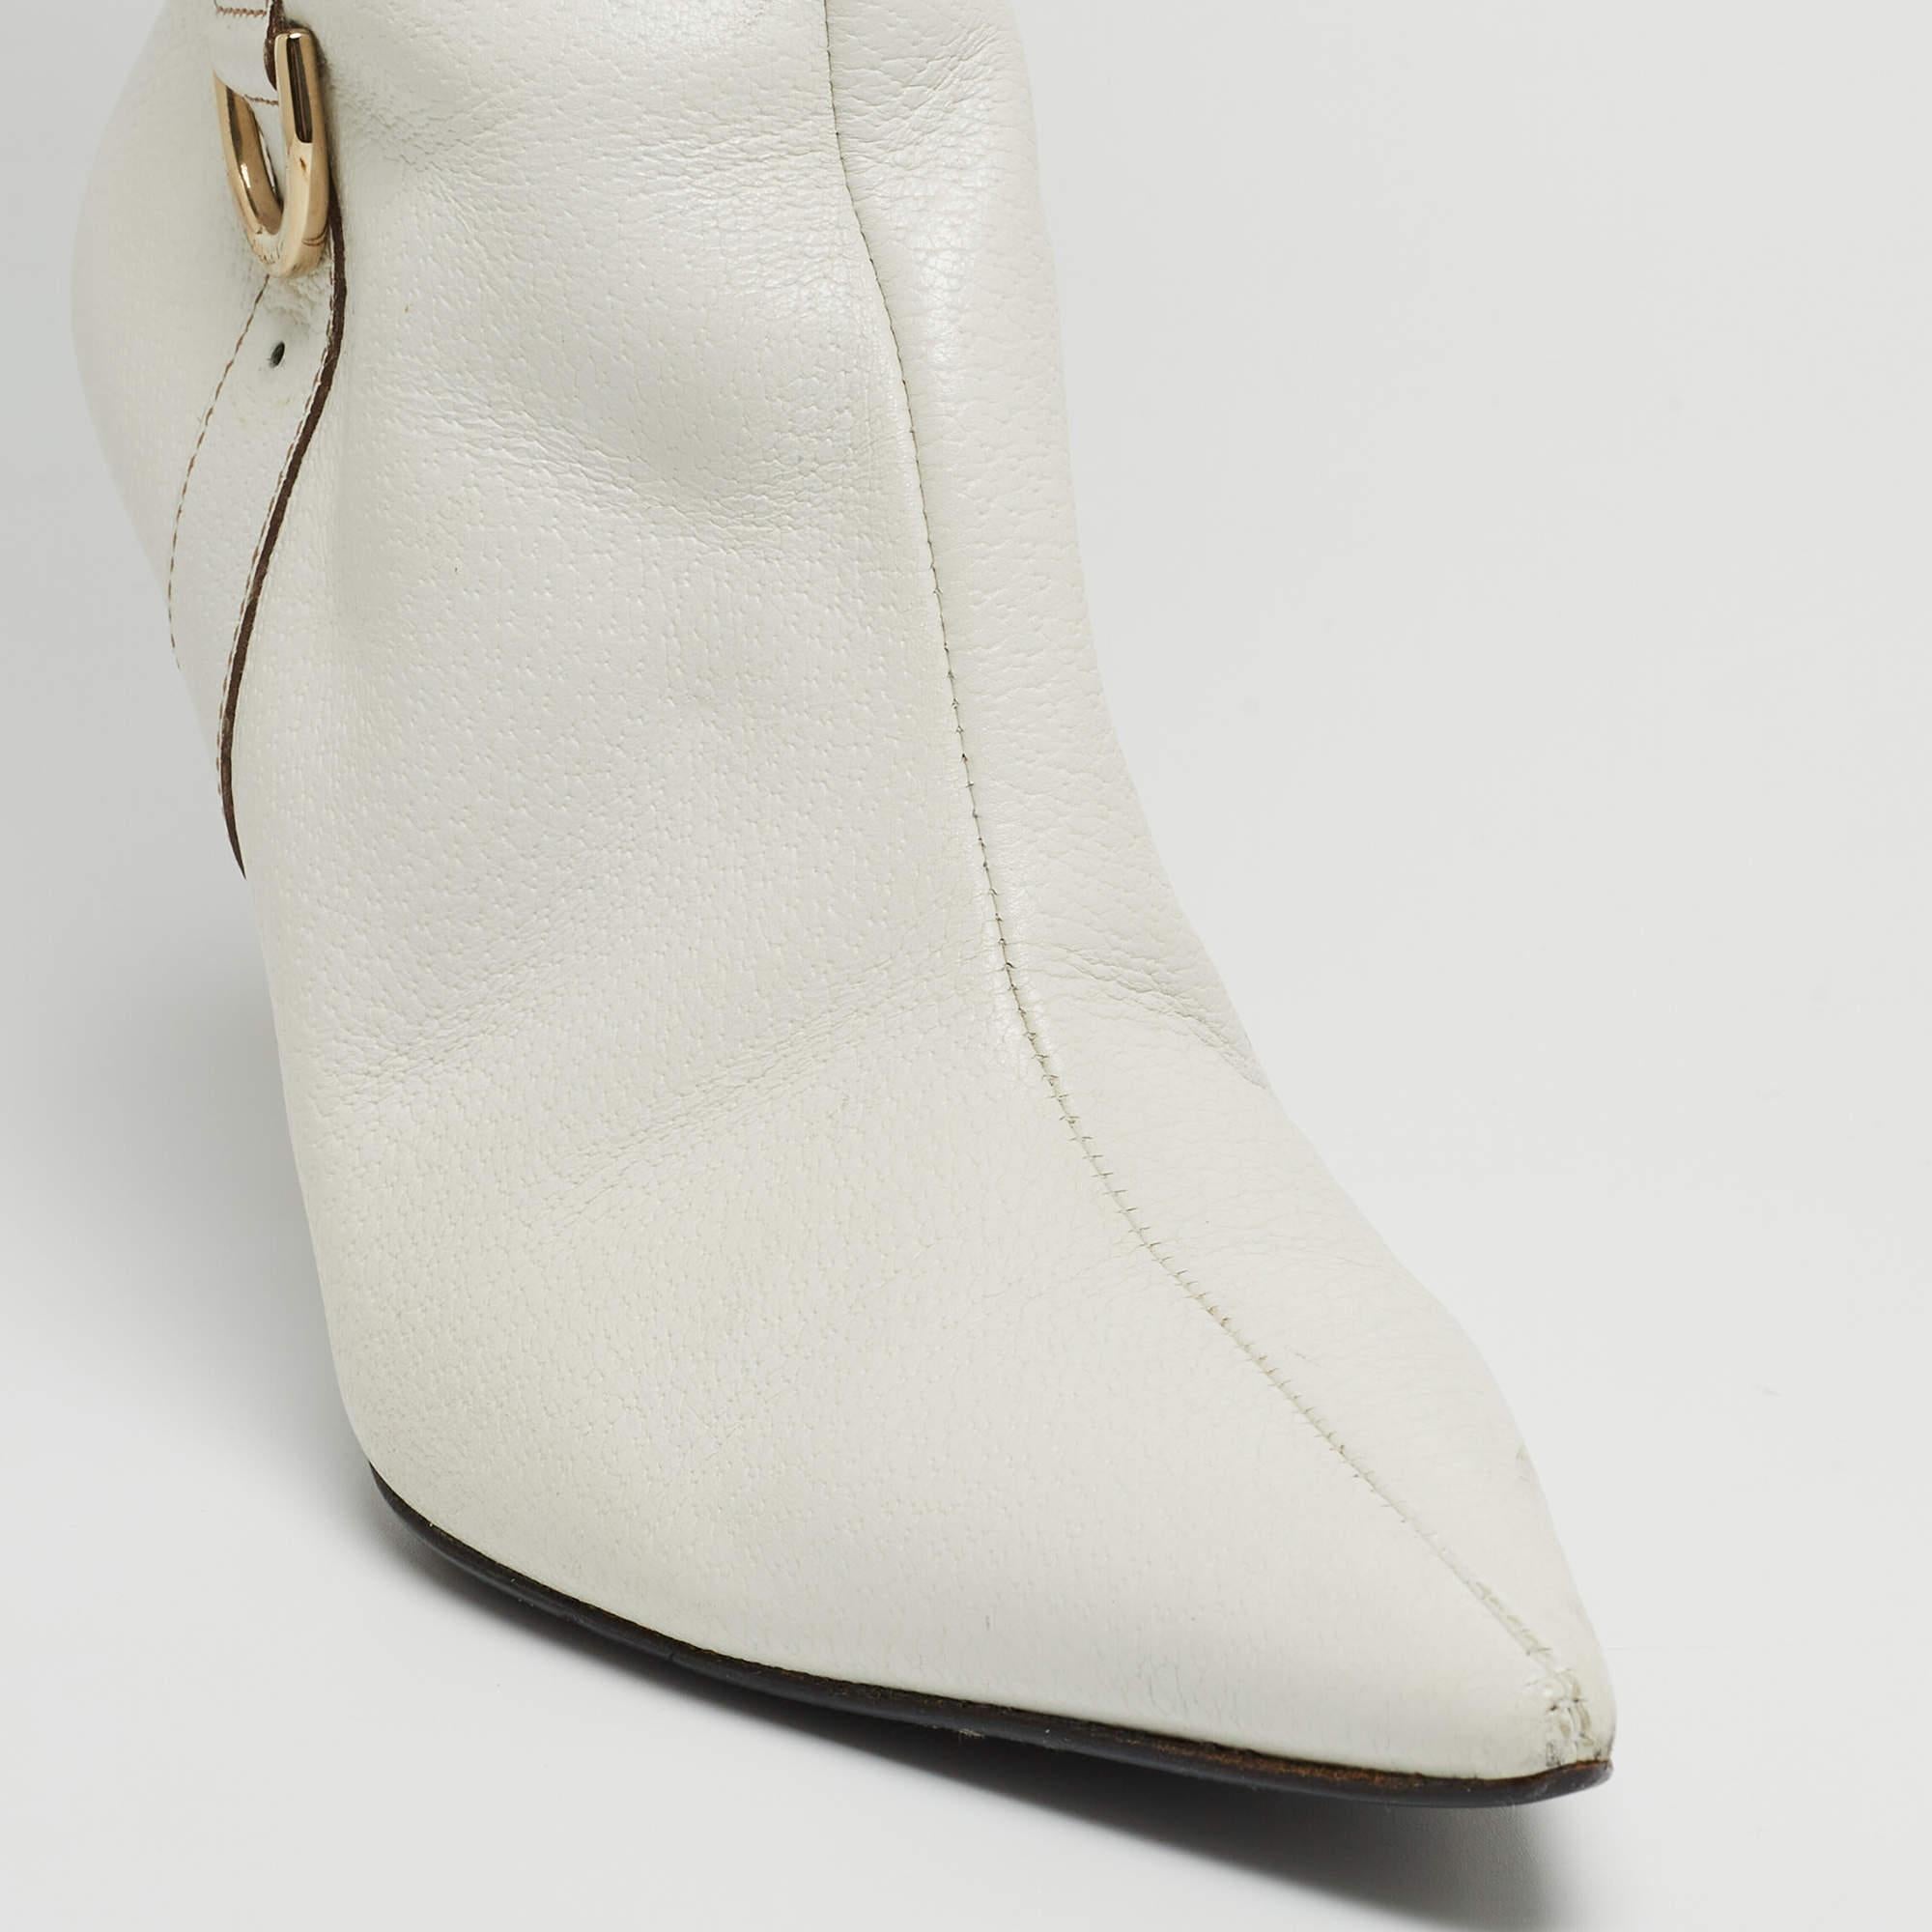 Gucci White Leather Pointed Toe Knee Length Boots Size 41 1